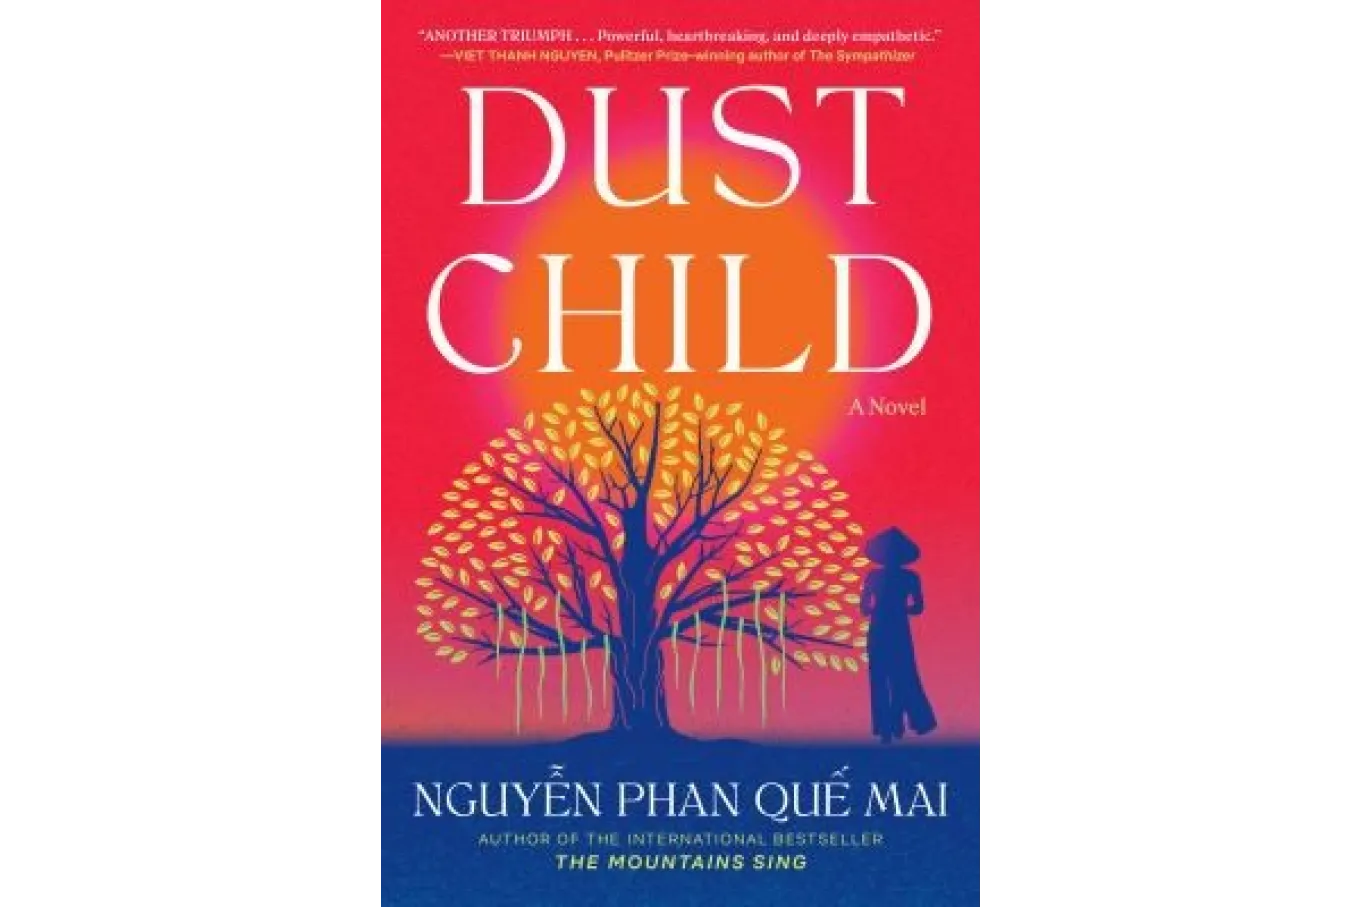 cover of Dust Child. A tree in shades of blue is centered on the cover; a person stands next to the tree. The background is a vivid red-orange.